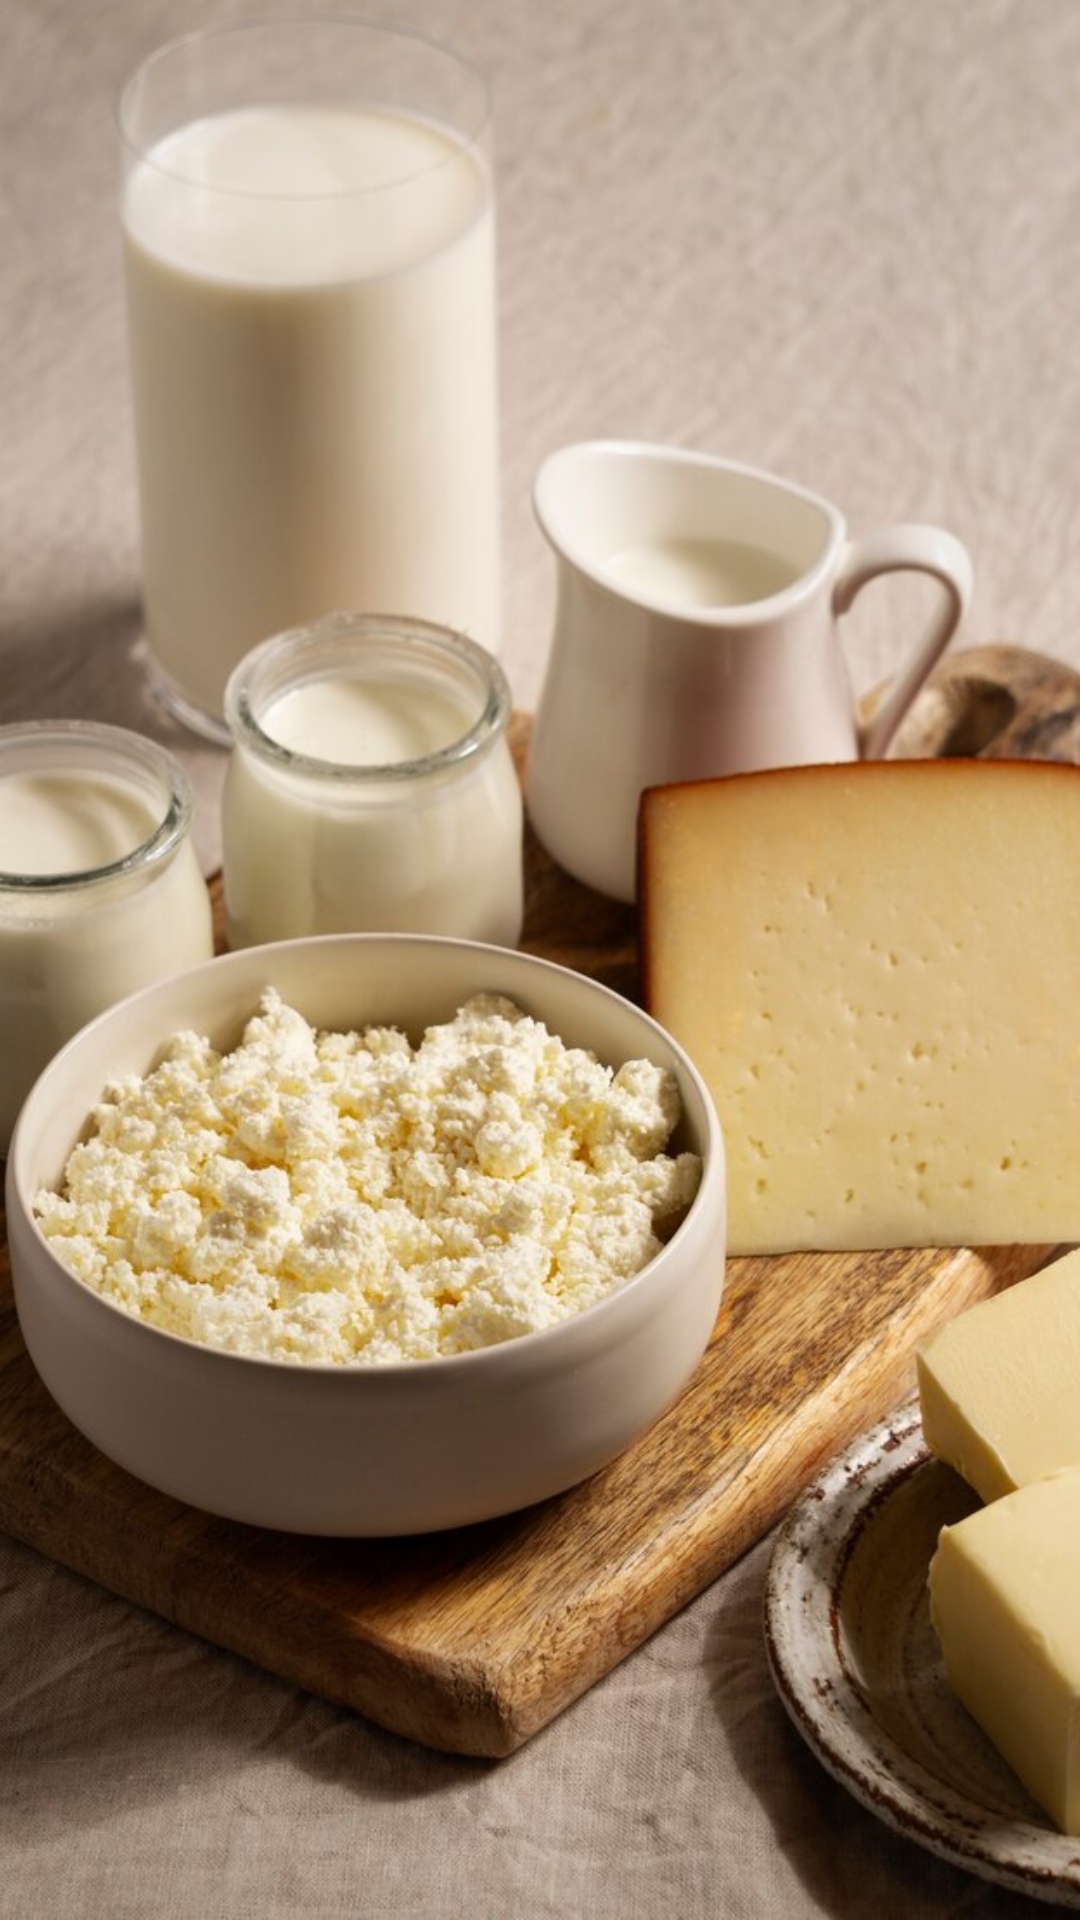 5 dairy foods that won't wreak havoc on your stomach